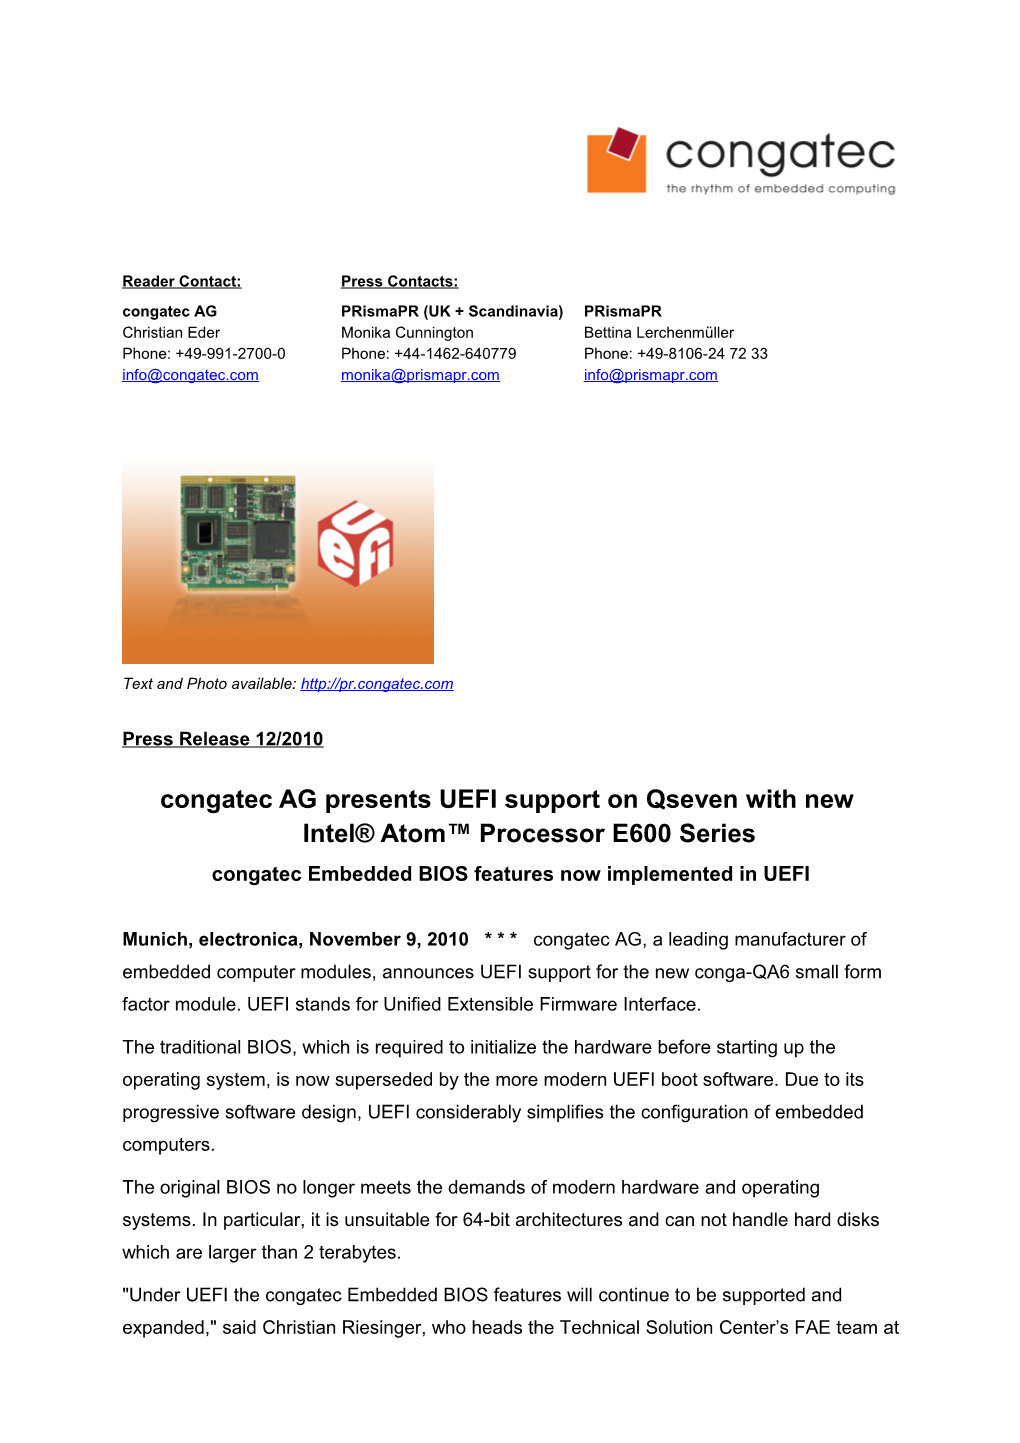 Congatec AG Presents UEFI Support on Qseven with New Intel Atom Processor E600 Series